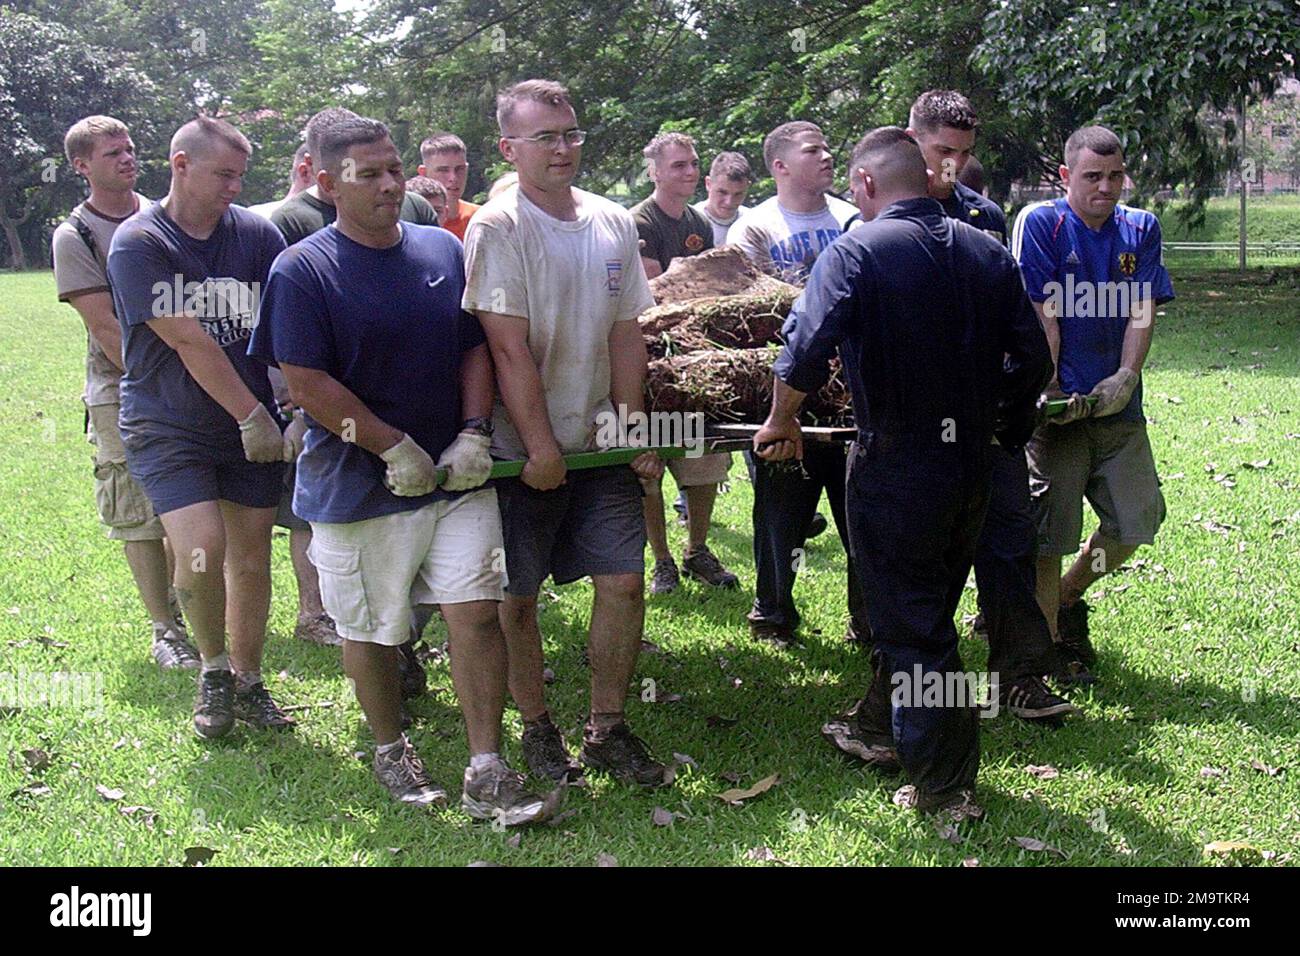 US Marine Corps (USMC) members from Vertical Marine Fighter Attack Squadron 212 (VMFA-212) based at Marine Corps Air Station (MCAS) Iwakuni, Japan, carry fallen trees away from land used by intellectually disabled children, near Paya Lebar, Singapore, during Exercise Commando Sling with the Singaporean Royal Air Force. Base: Paya Lebar Country: Singapore (SGP) Stock Photo